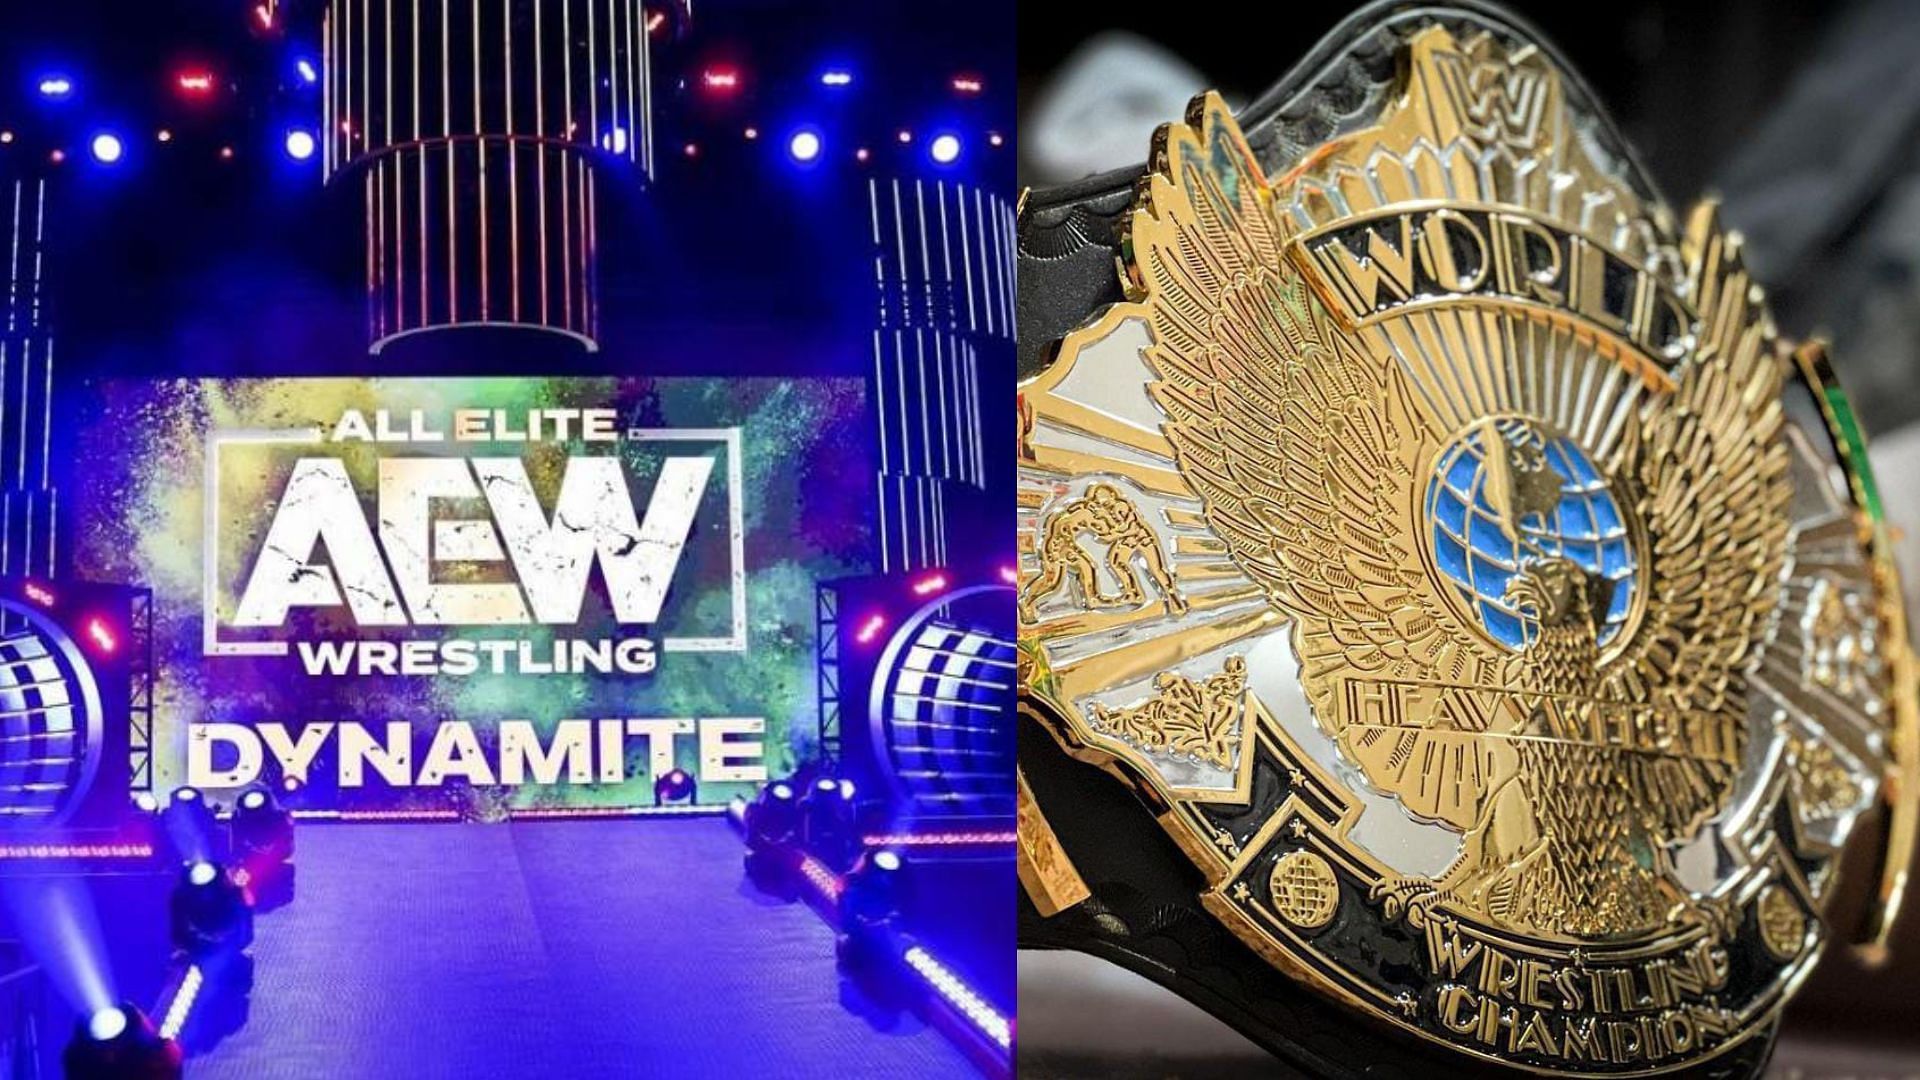 AEW Dynamite will be having their 200th episode next week